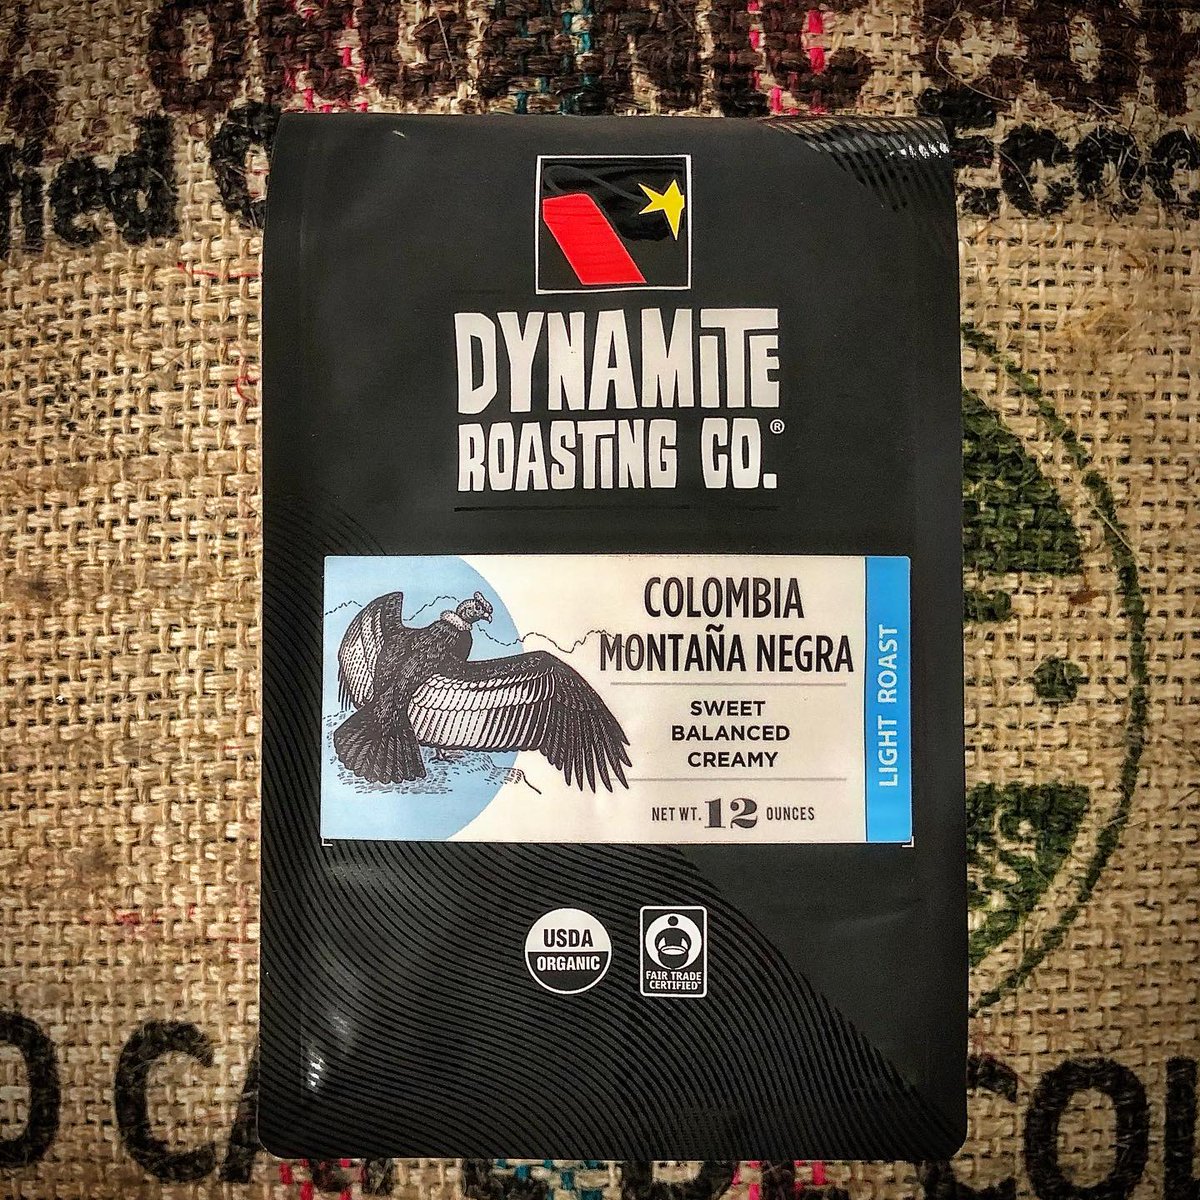 Who doesn't love a delicious cup of coffee?! @DynamiteRoastin, located in Black Mountain, produces a variety of coffee flavors from creamy and light to strong. Follow along on their social media channels for the latest info. #SocialMediaSunday #BuyLocal #NCAgriculture